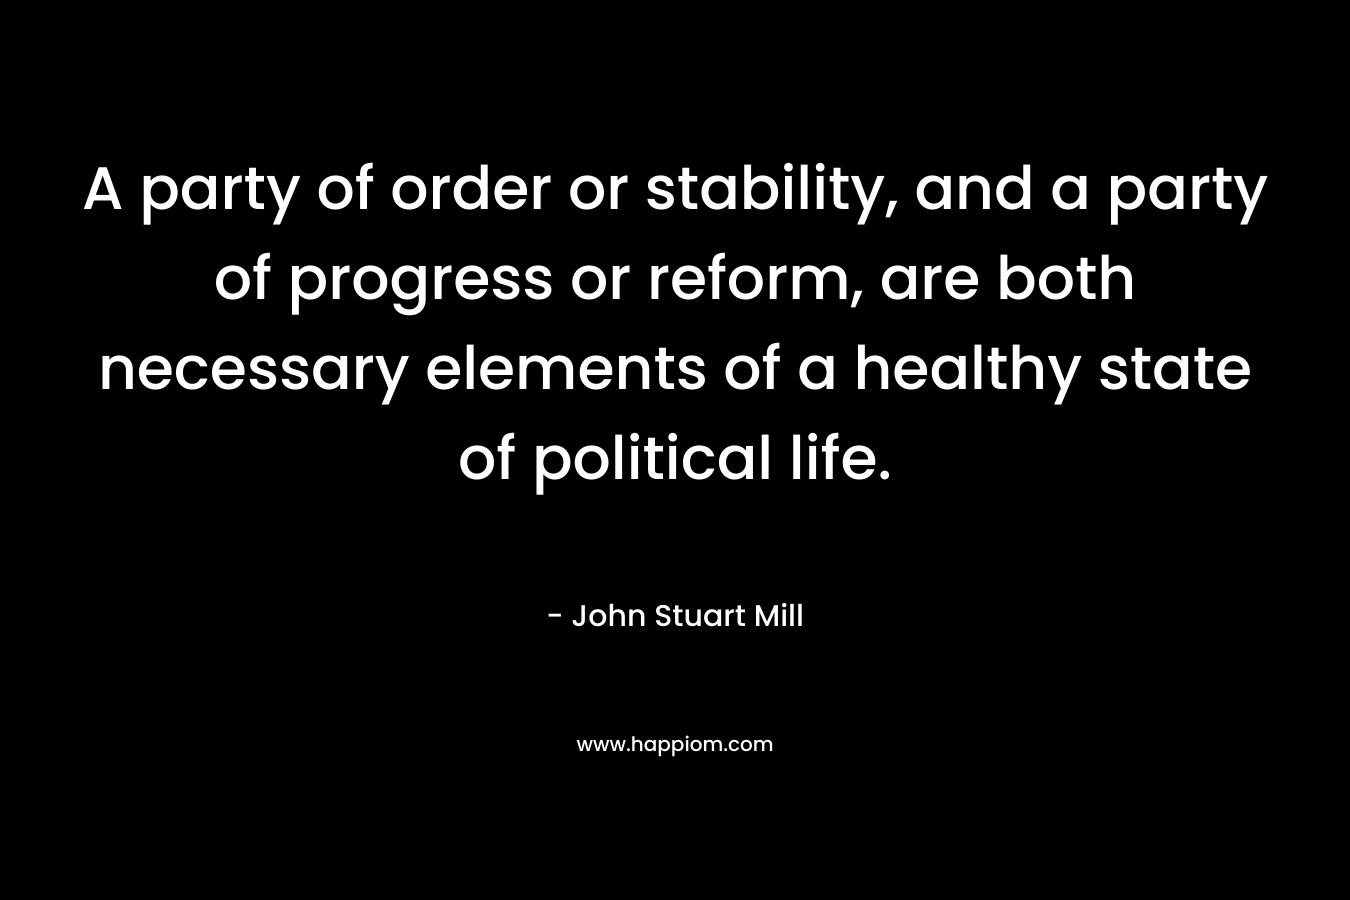 A party of order or stability, and a party of progress or reform, are both necessary elements of a healthy state of political life. – John Stuart Mill